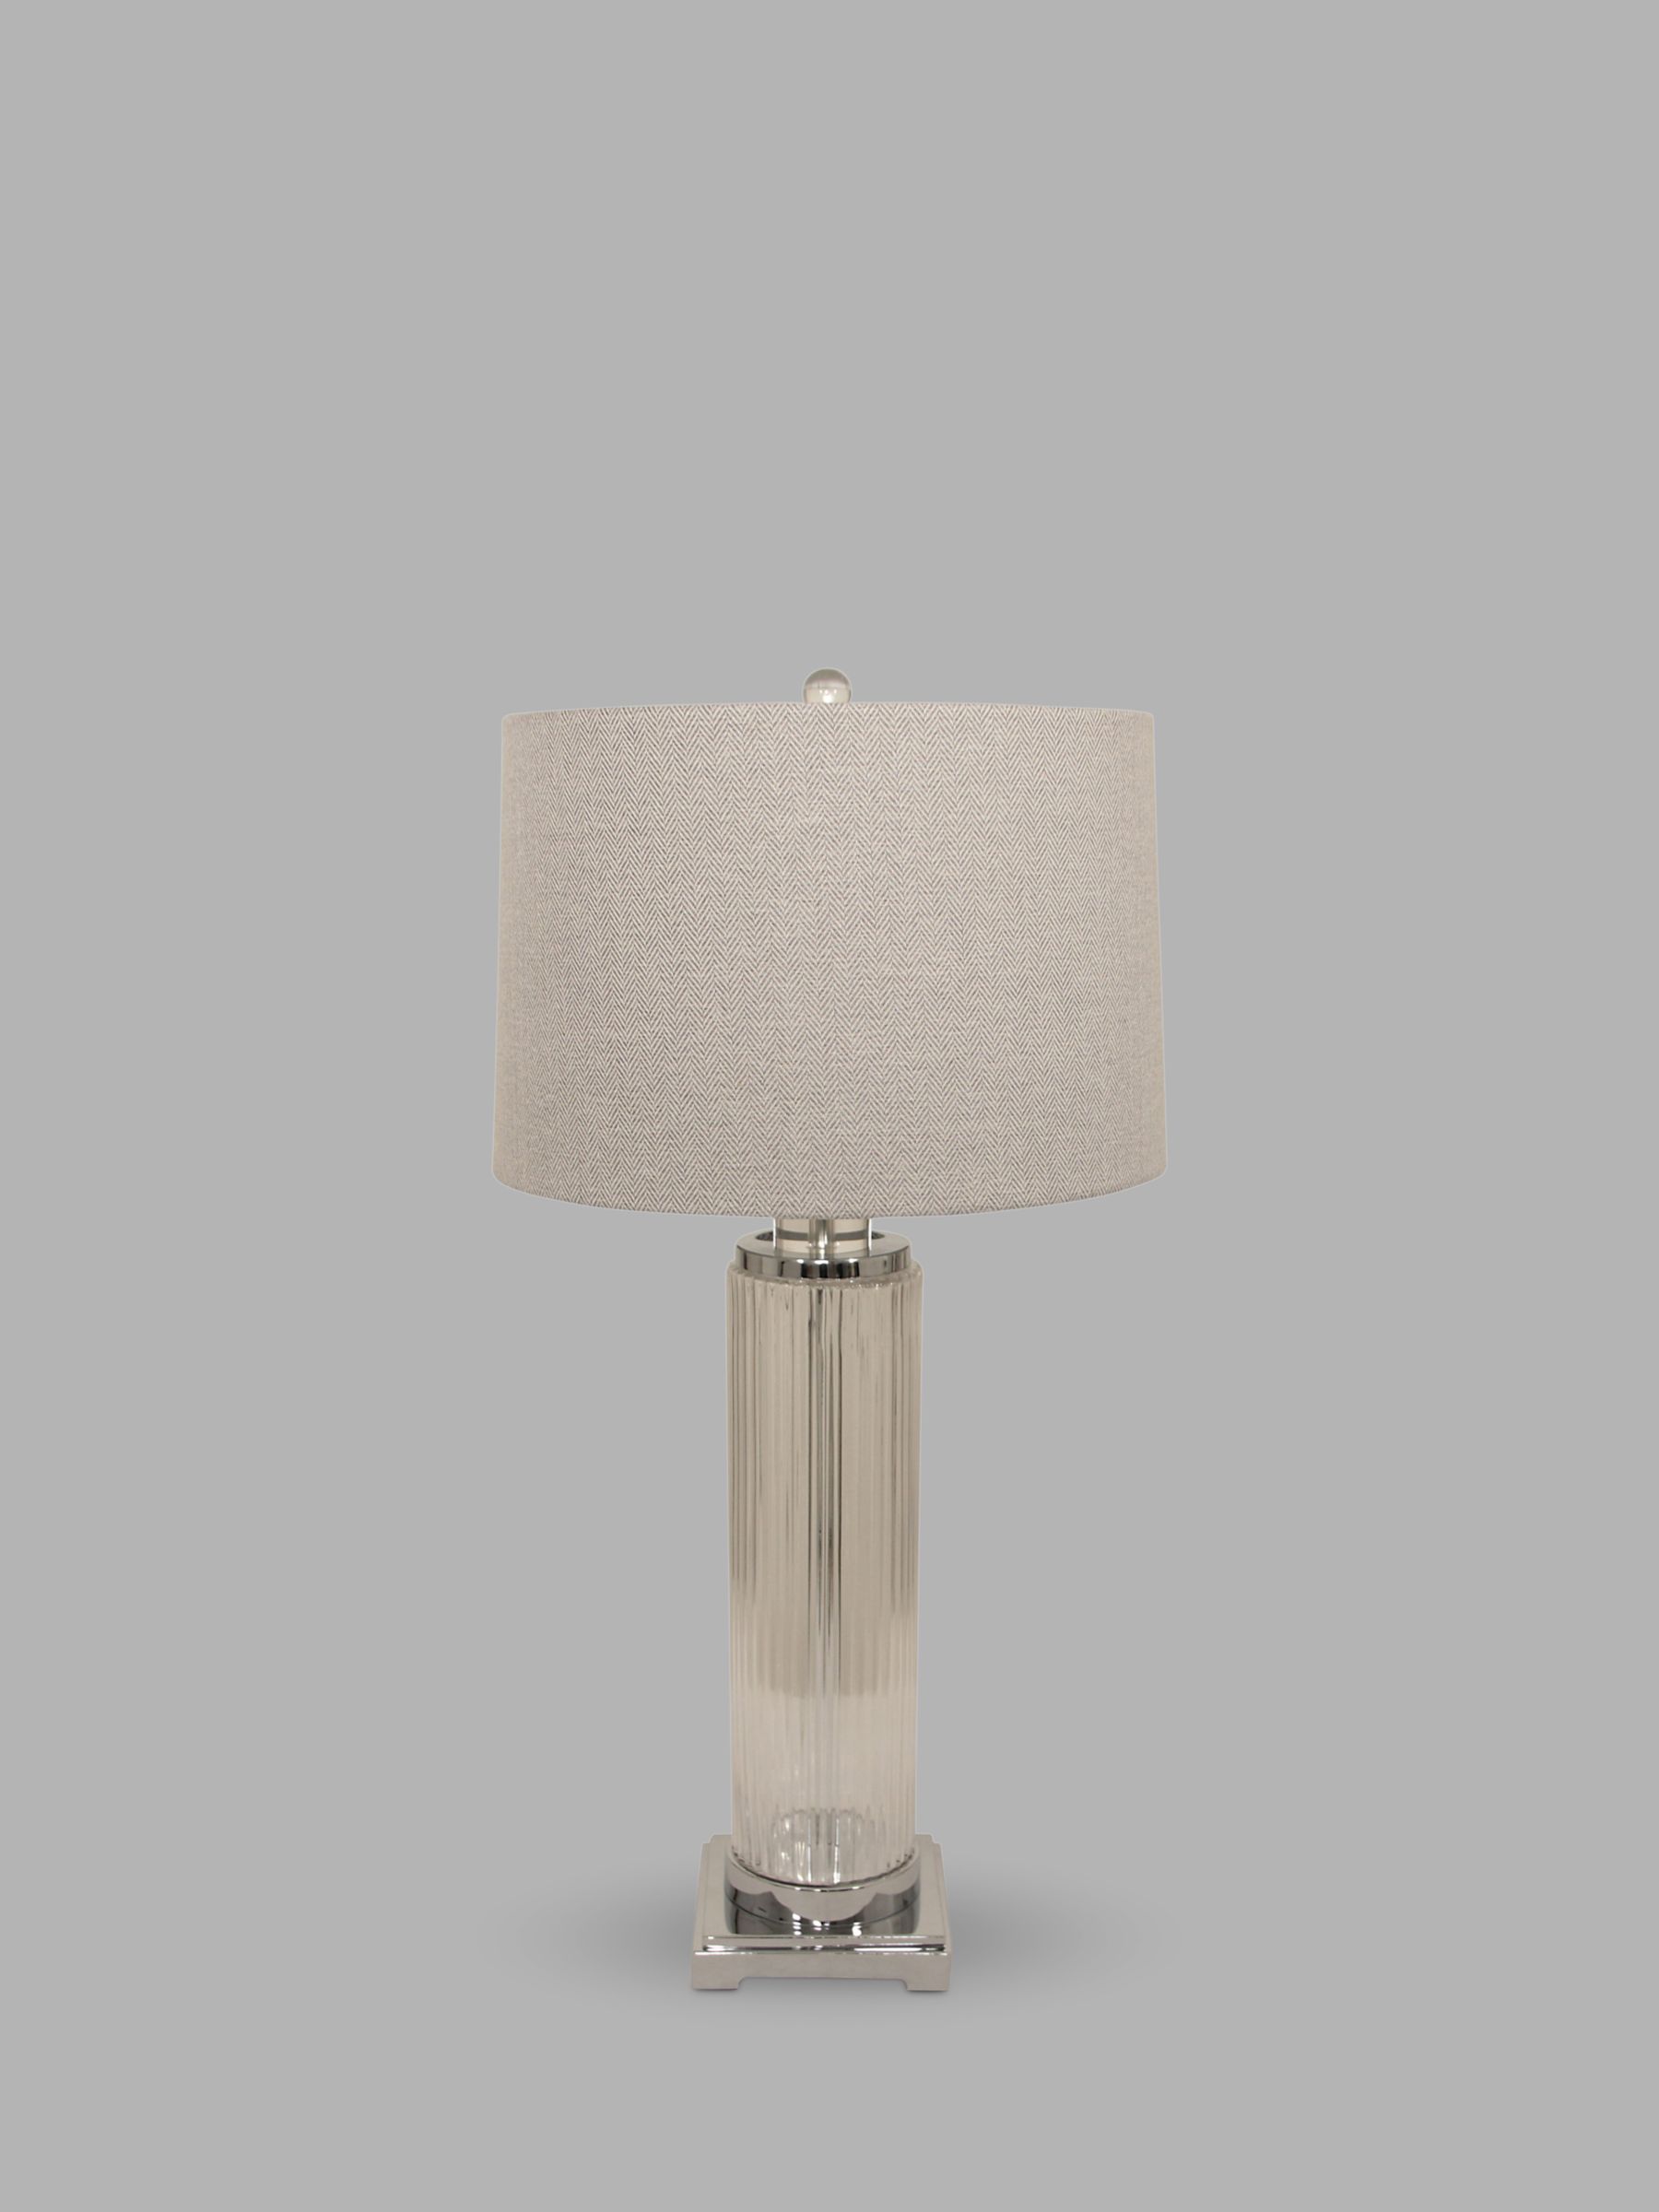 Photo of One.world clifton art deco glass base linen shade table lamp clear